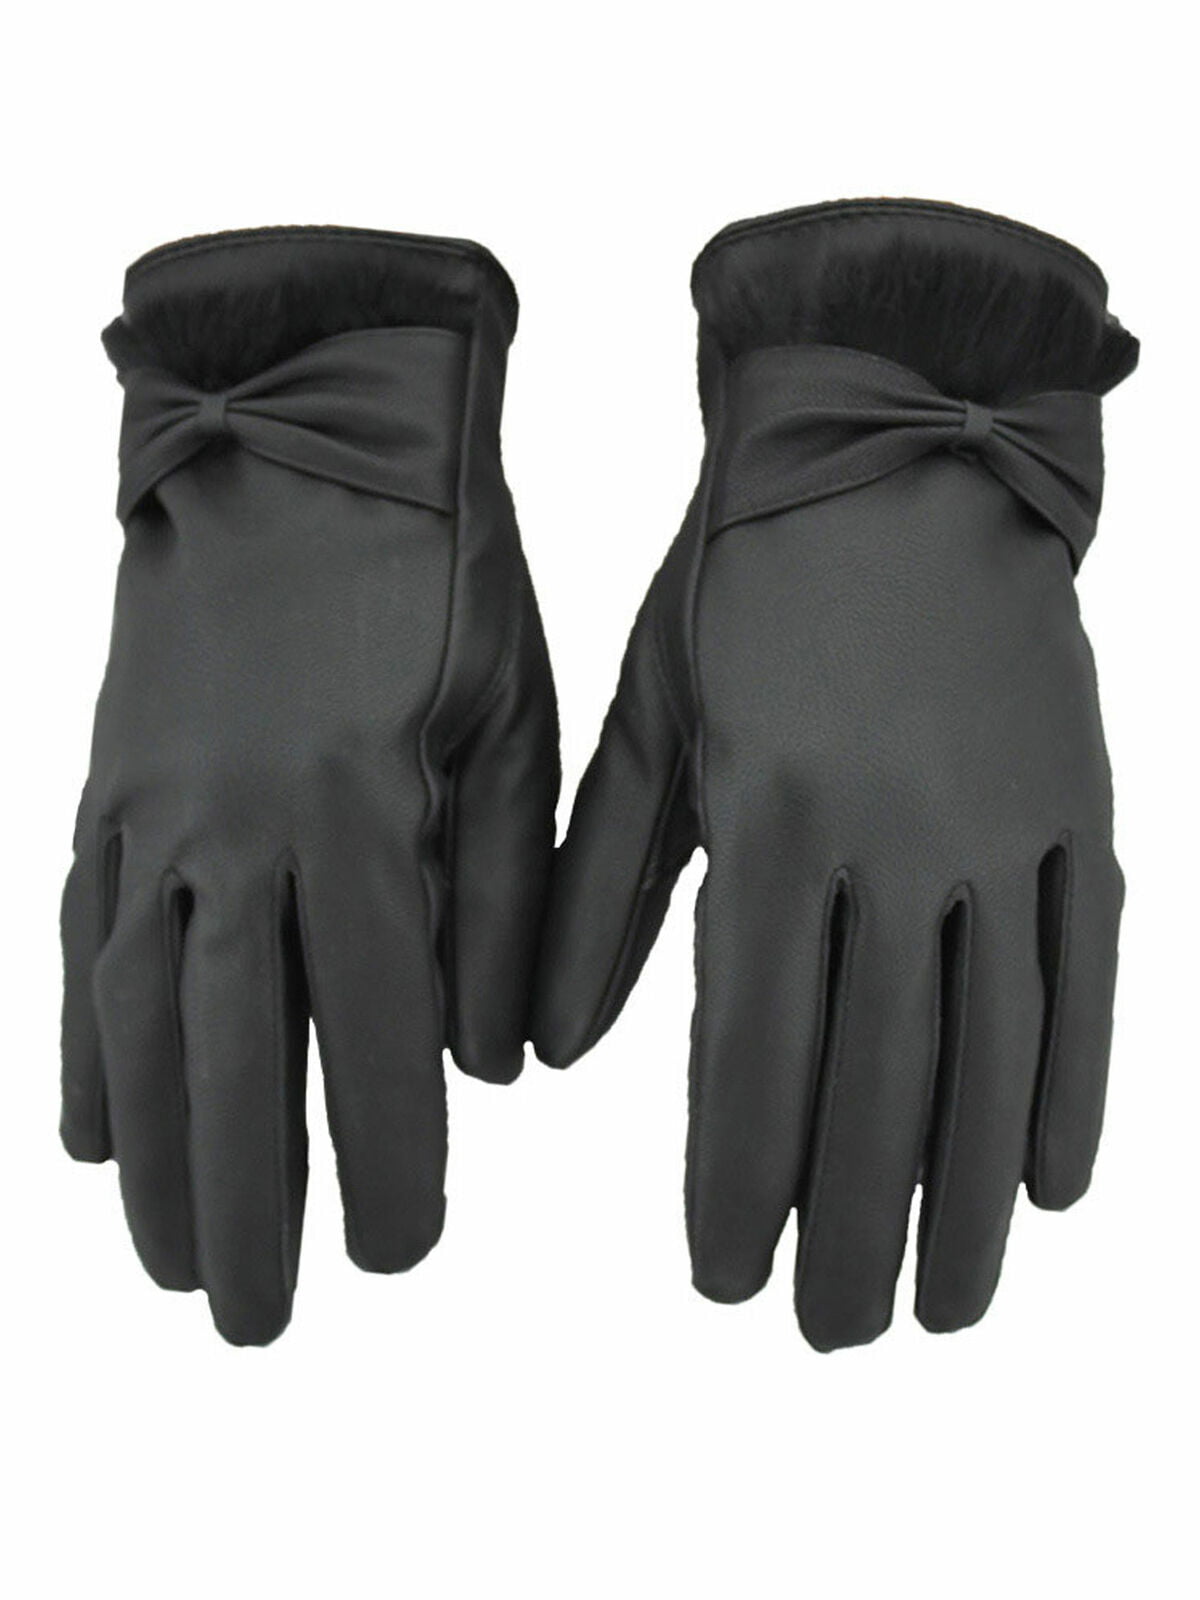 Touch Screen Thermal Gloves Waterproof Bowknot Gloves with Soft Plush Lining for Girls Women 